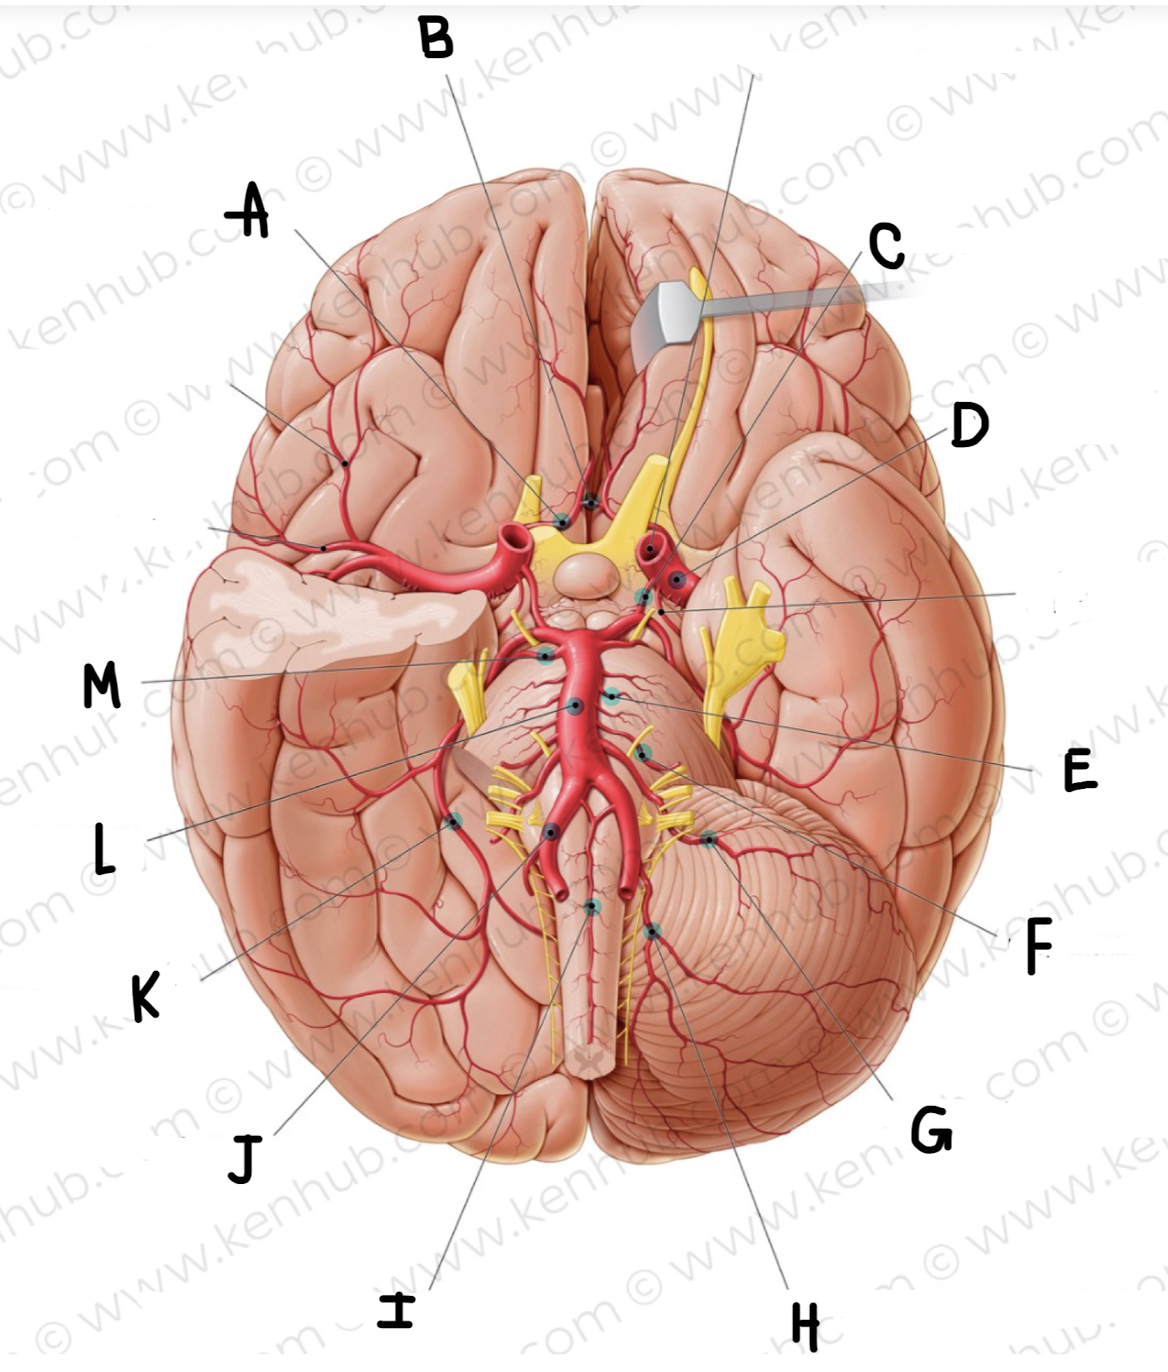 <p>What is the name of the artery labeled B? (click on picture and scroll to see which is labeled B)</p>